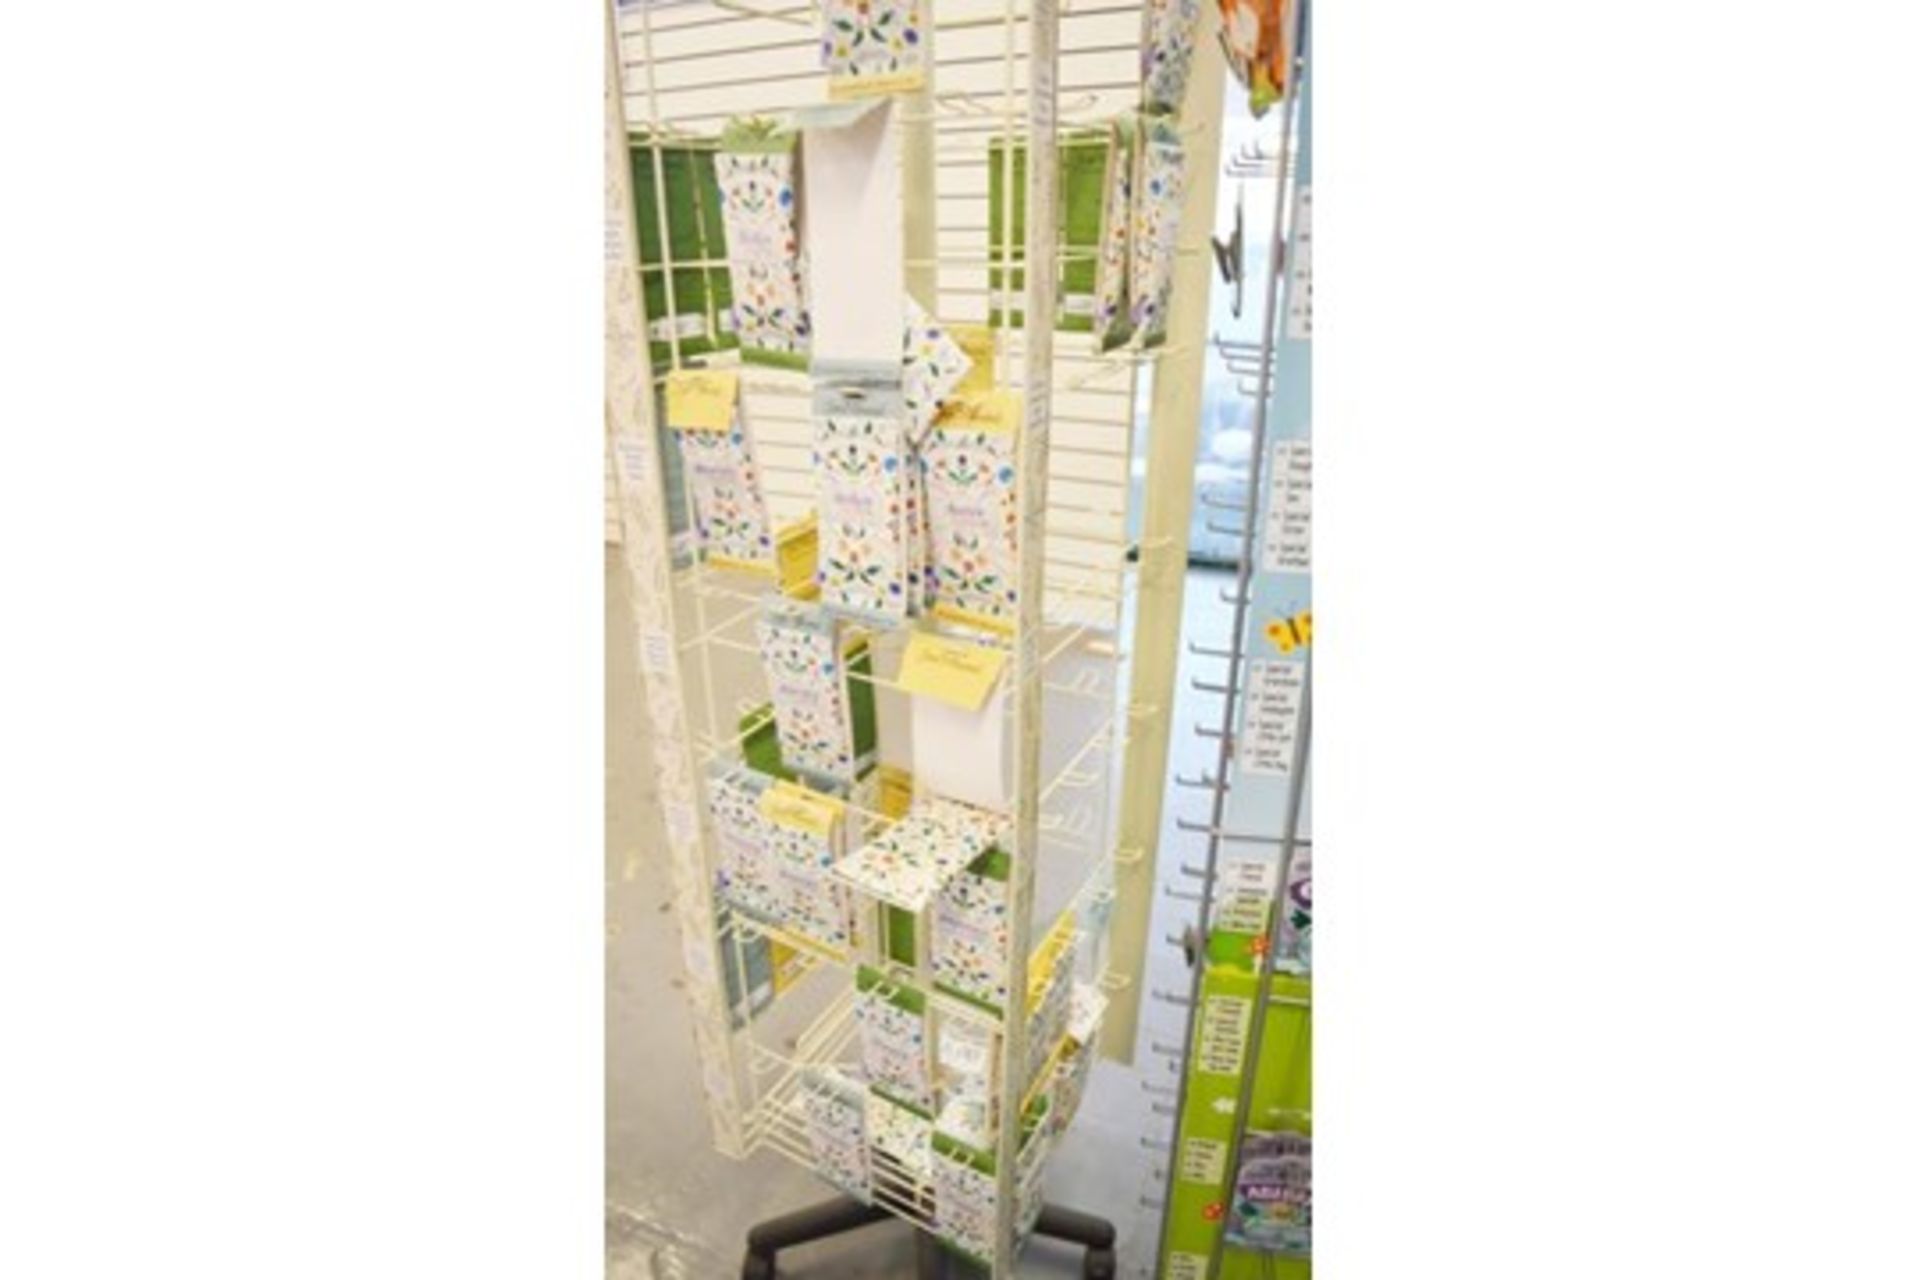 27 x Retail Carousel Display Stands With Approximately 2,800 Items of Resale Stock - Includes - Image 5 of 61